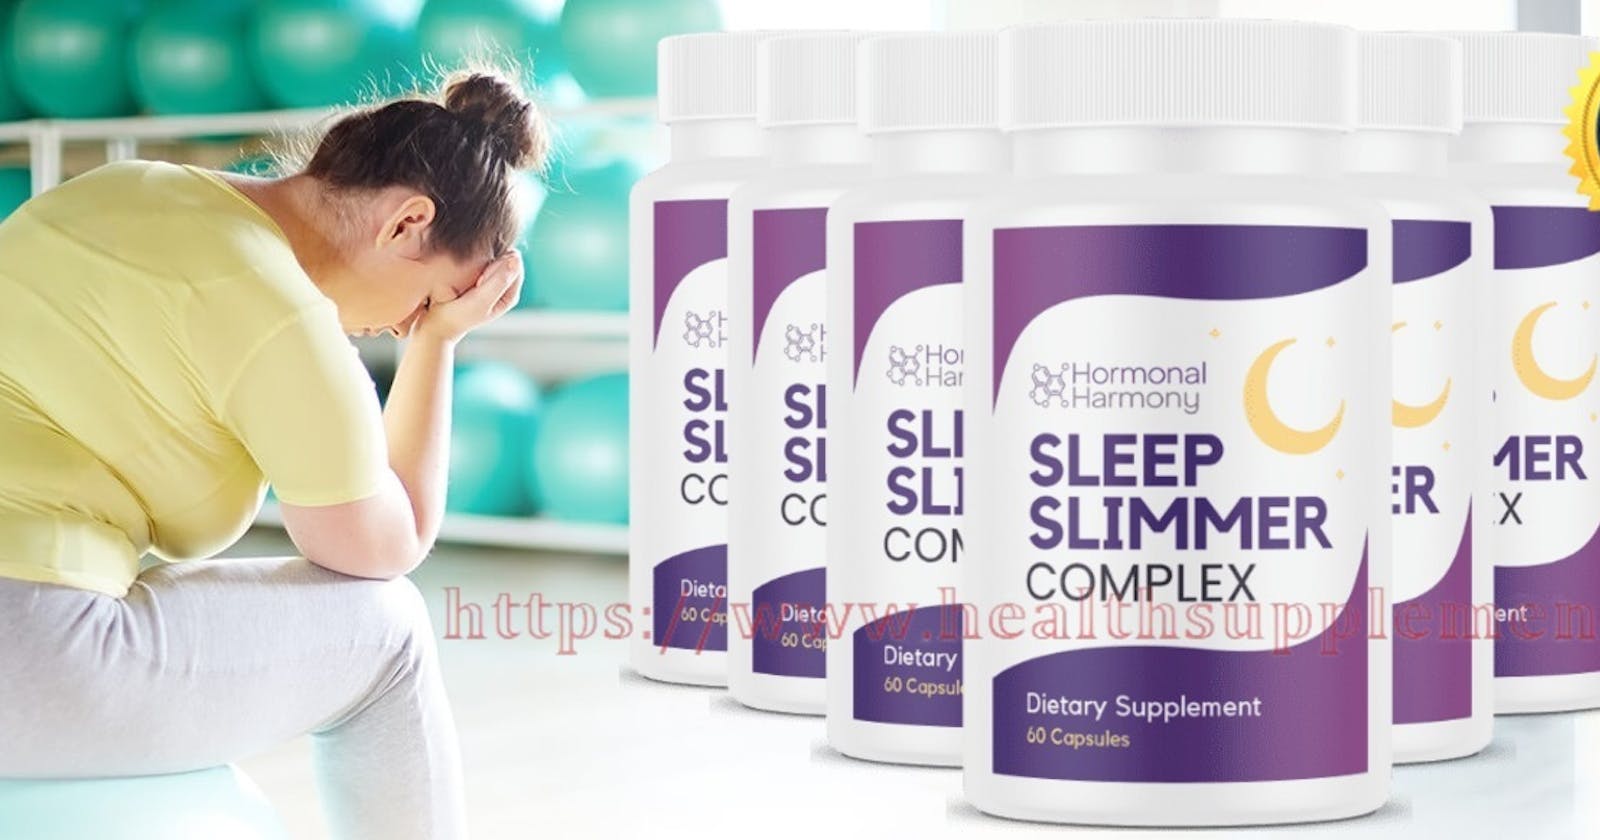 Hormonal Harmony Sleep Slimmer Complex Easiest Way Reduce Weight And Fat In Sleep Mode[Get 100% Result](Work Or Hoax